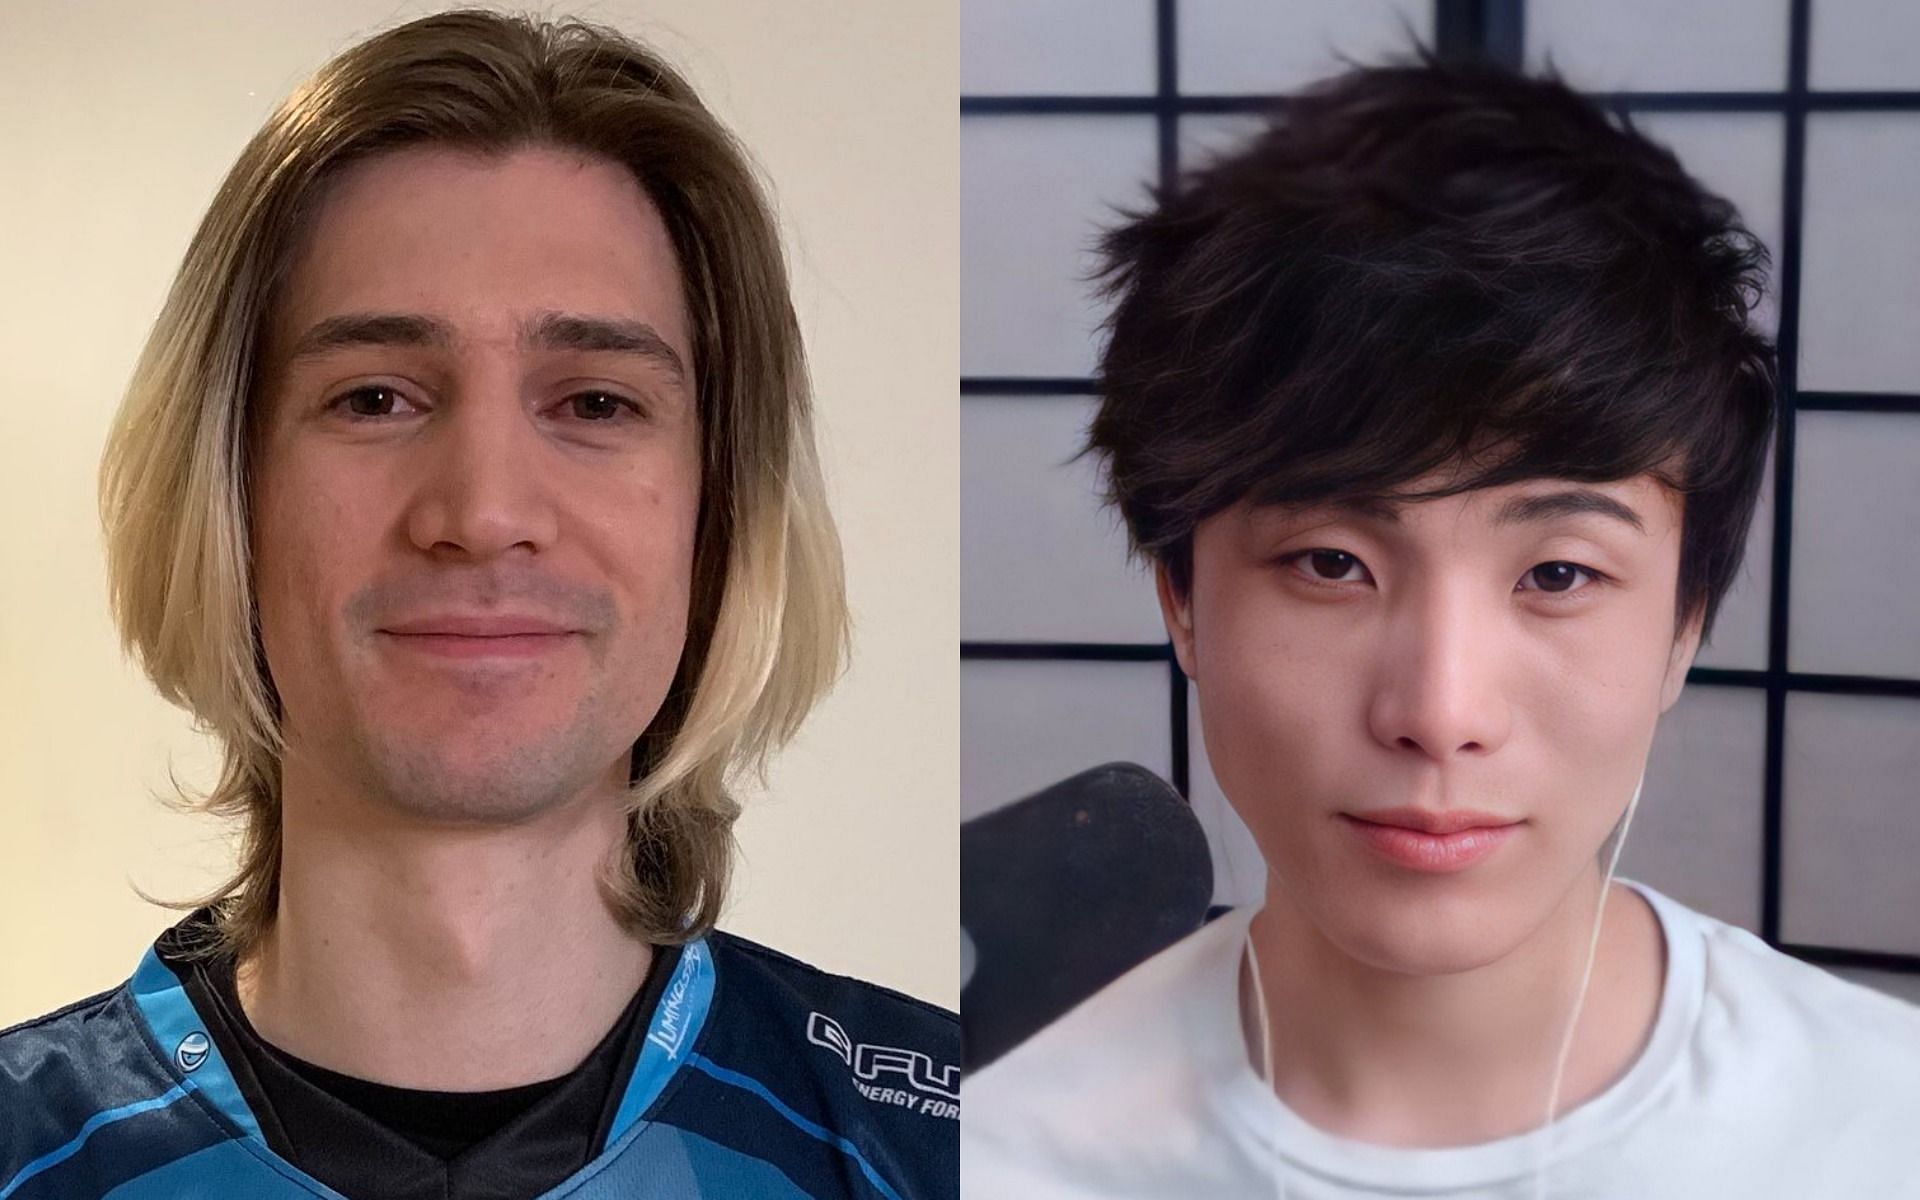 Sykkuno trolls xQc during a round of Phasmophobia (Images via Twitter/Twitch)